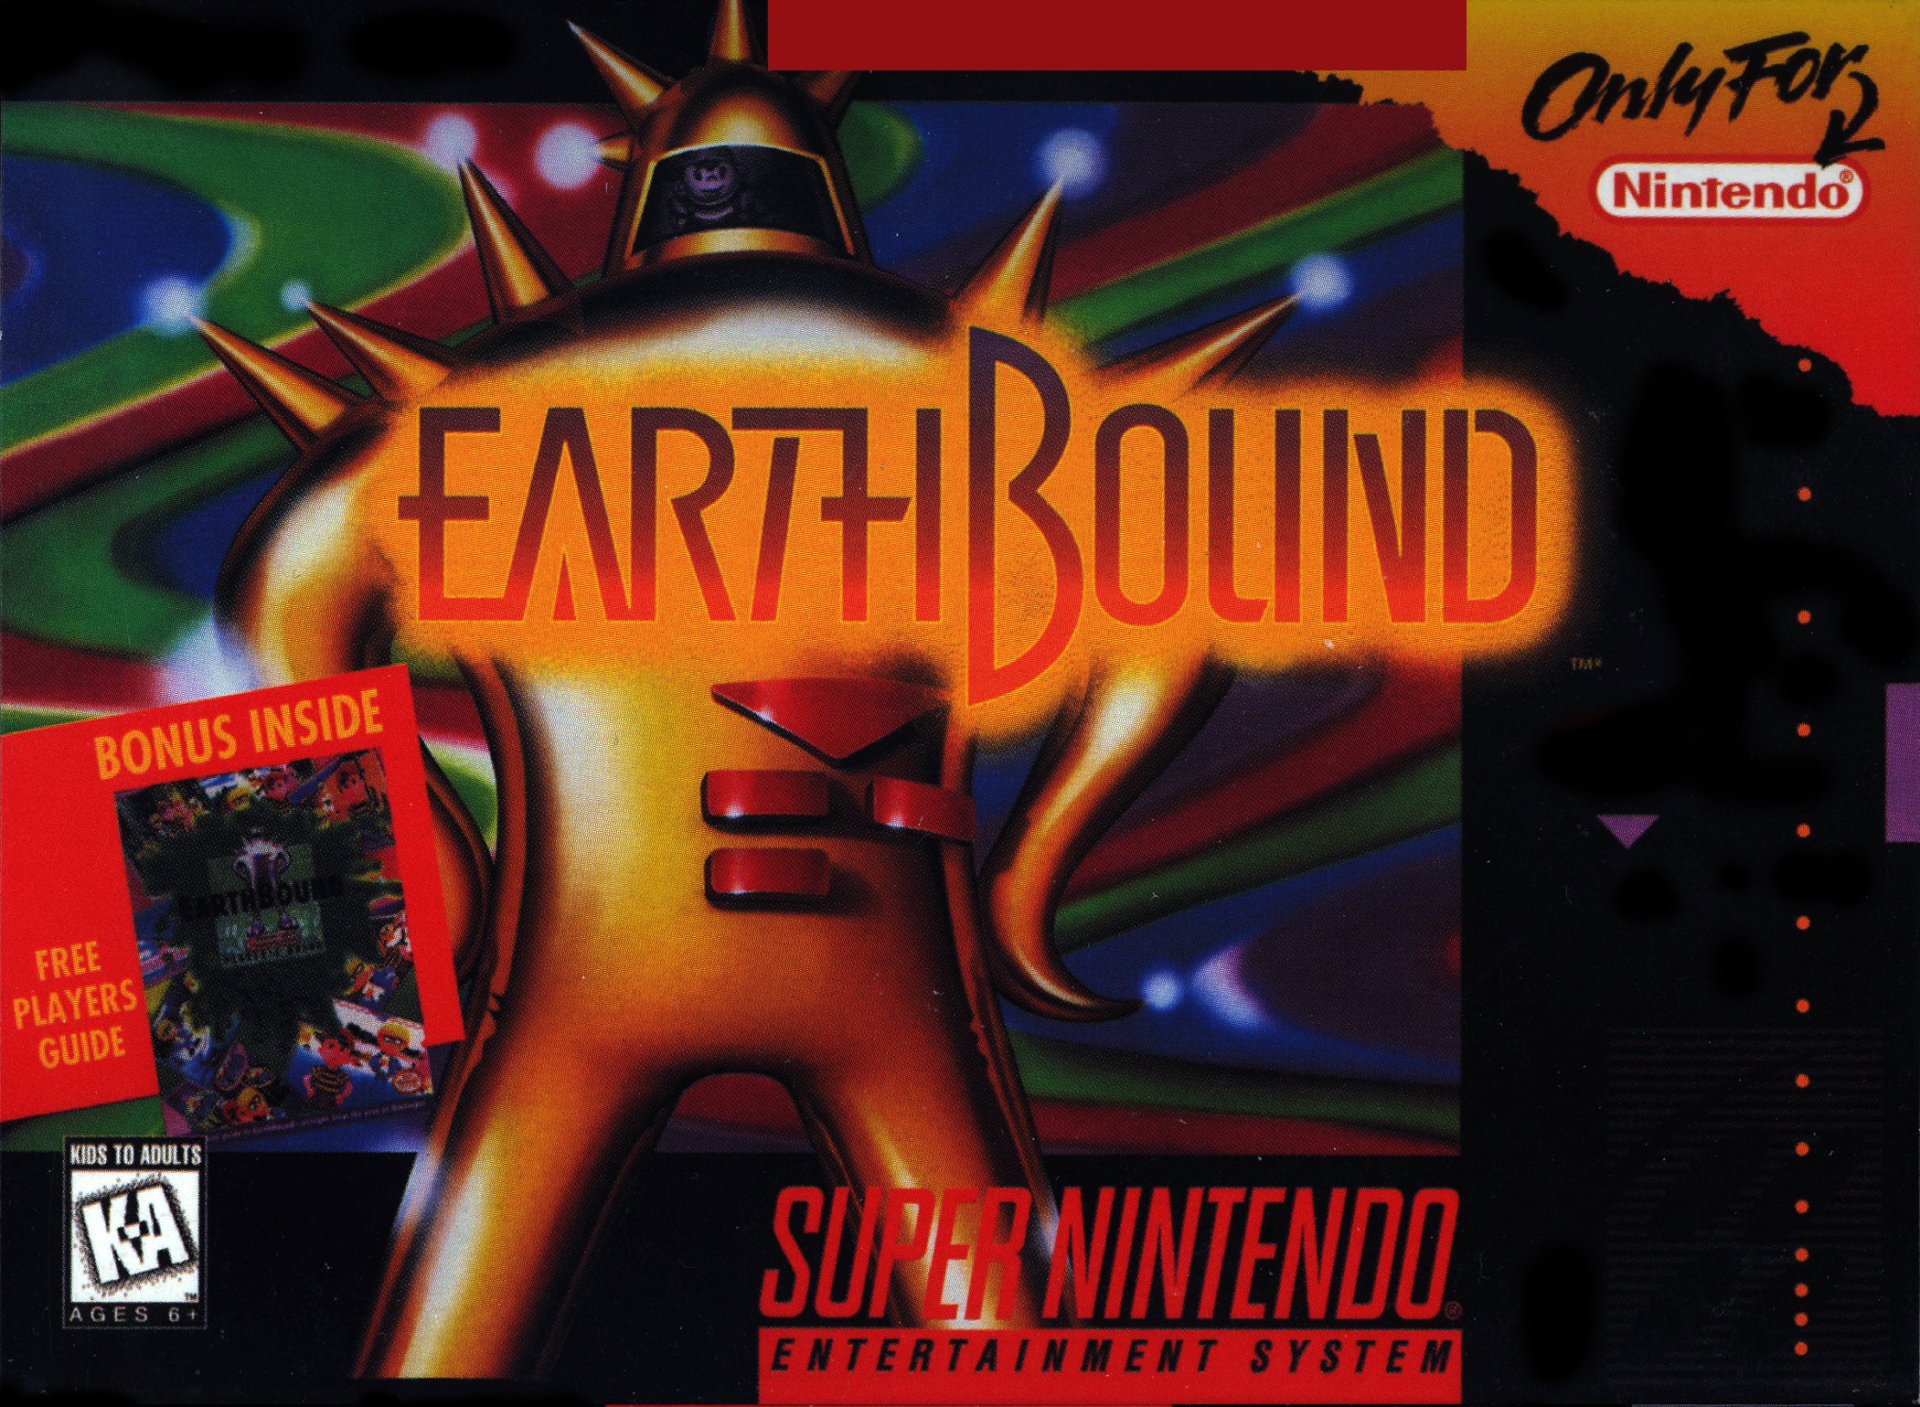 download earthbound in box